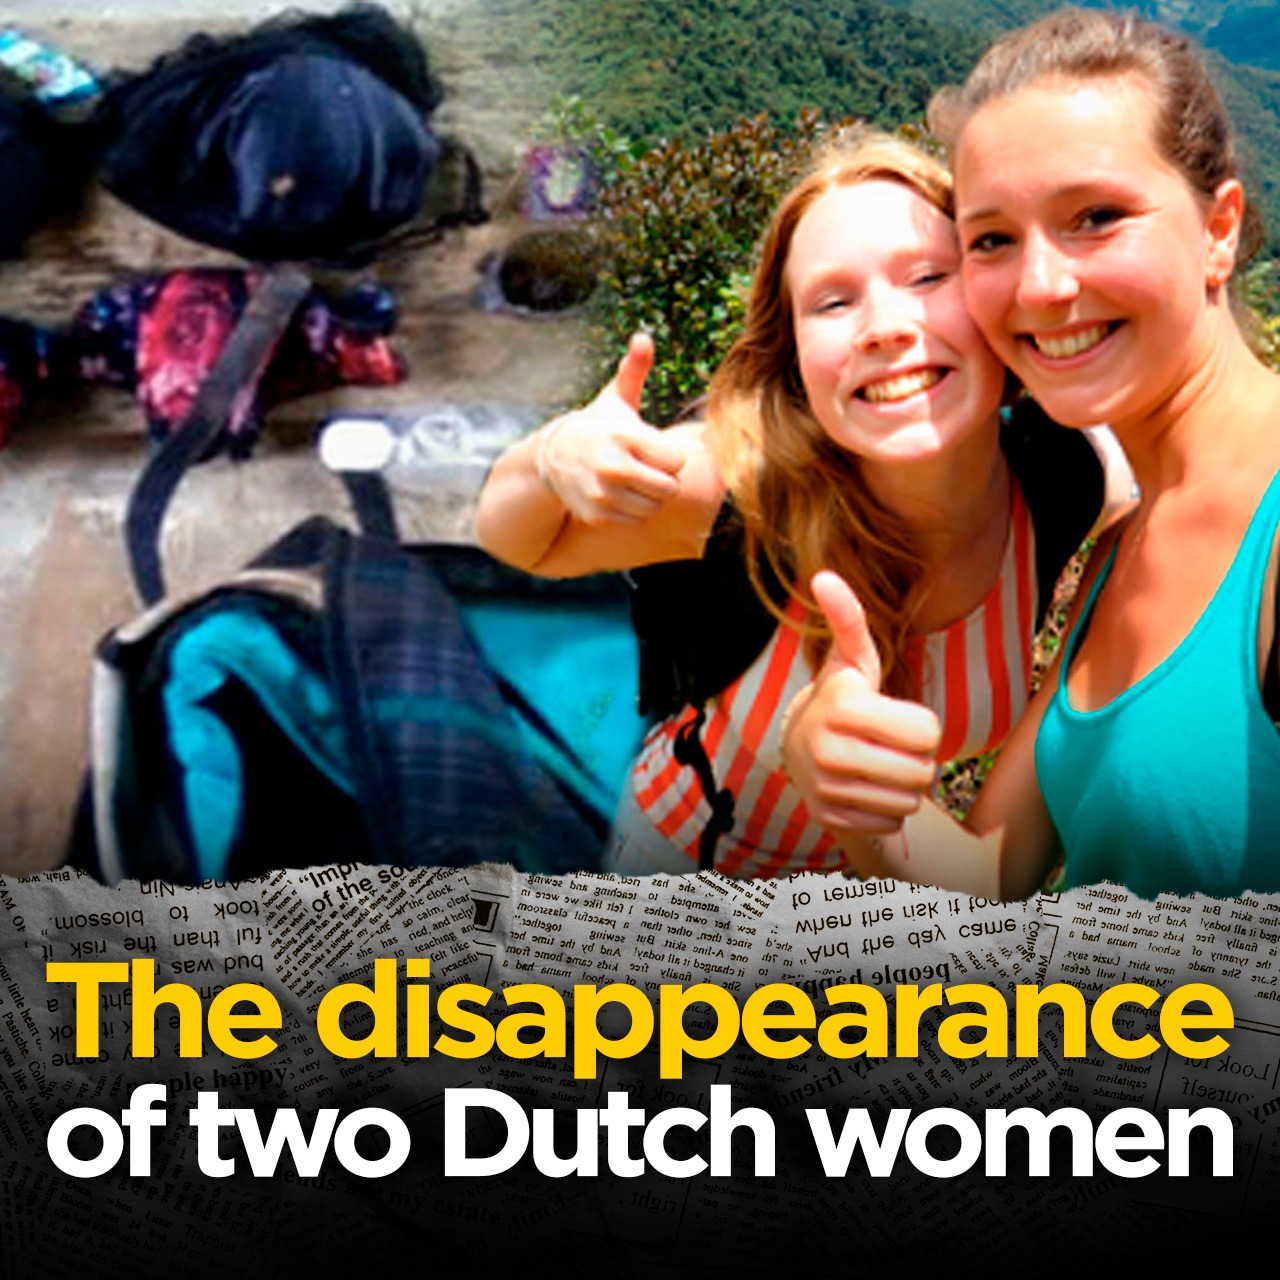 The mysterious disappearance of Dutch girls Kris Kremers and Lisanne Froon in Panama